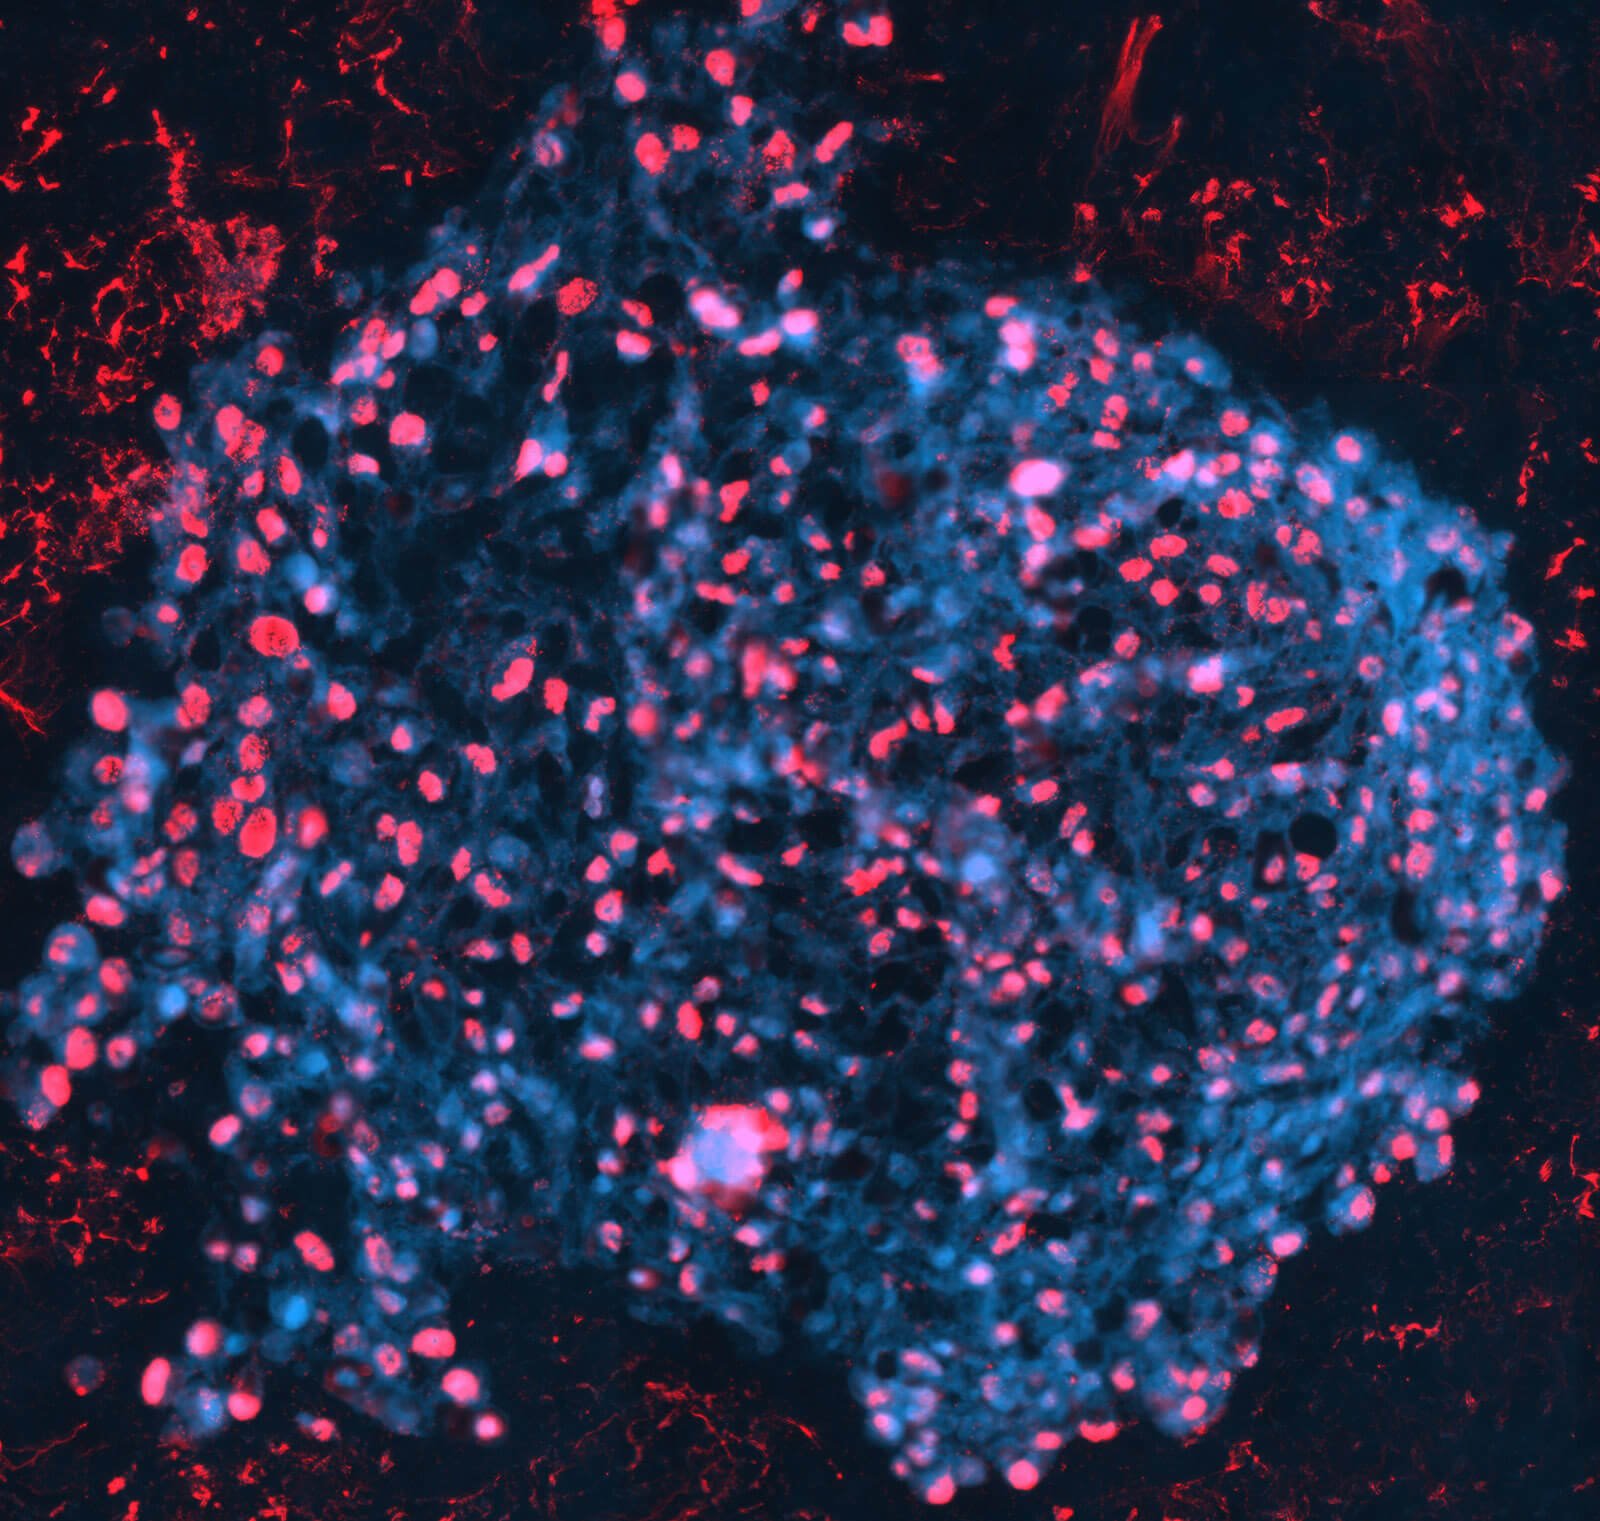 An image of a micro-tumor by NMI Natural and Medical Sciences Institute